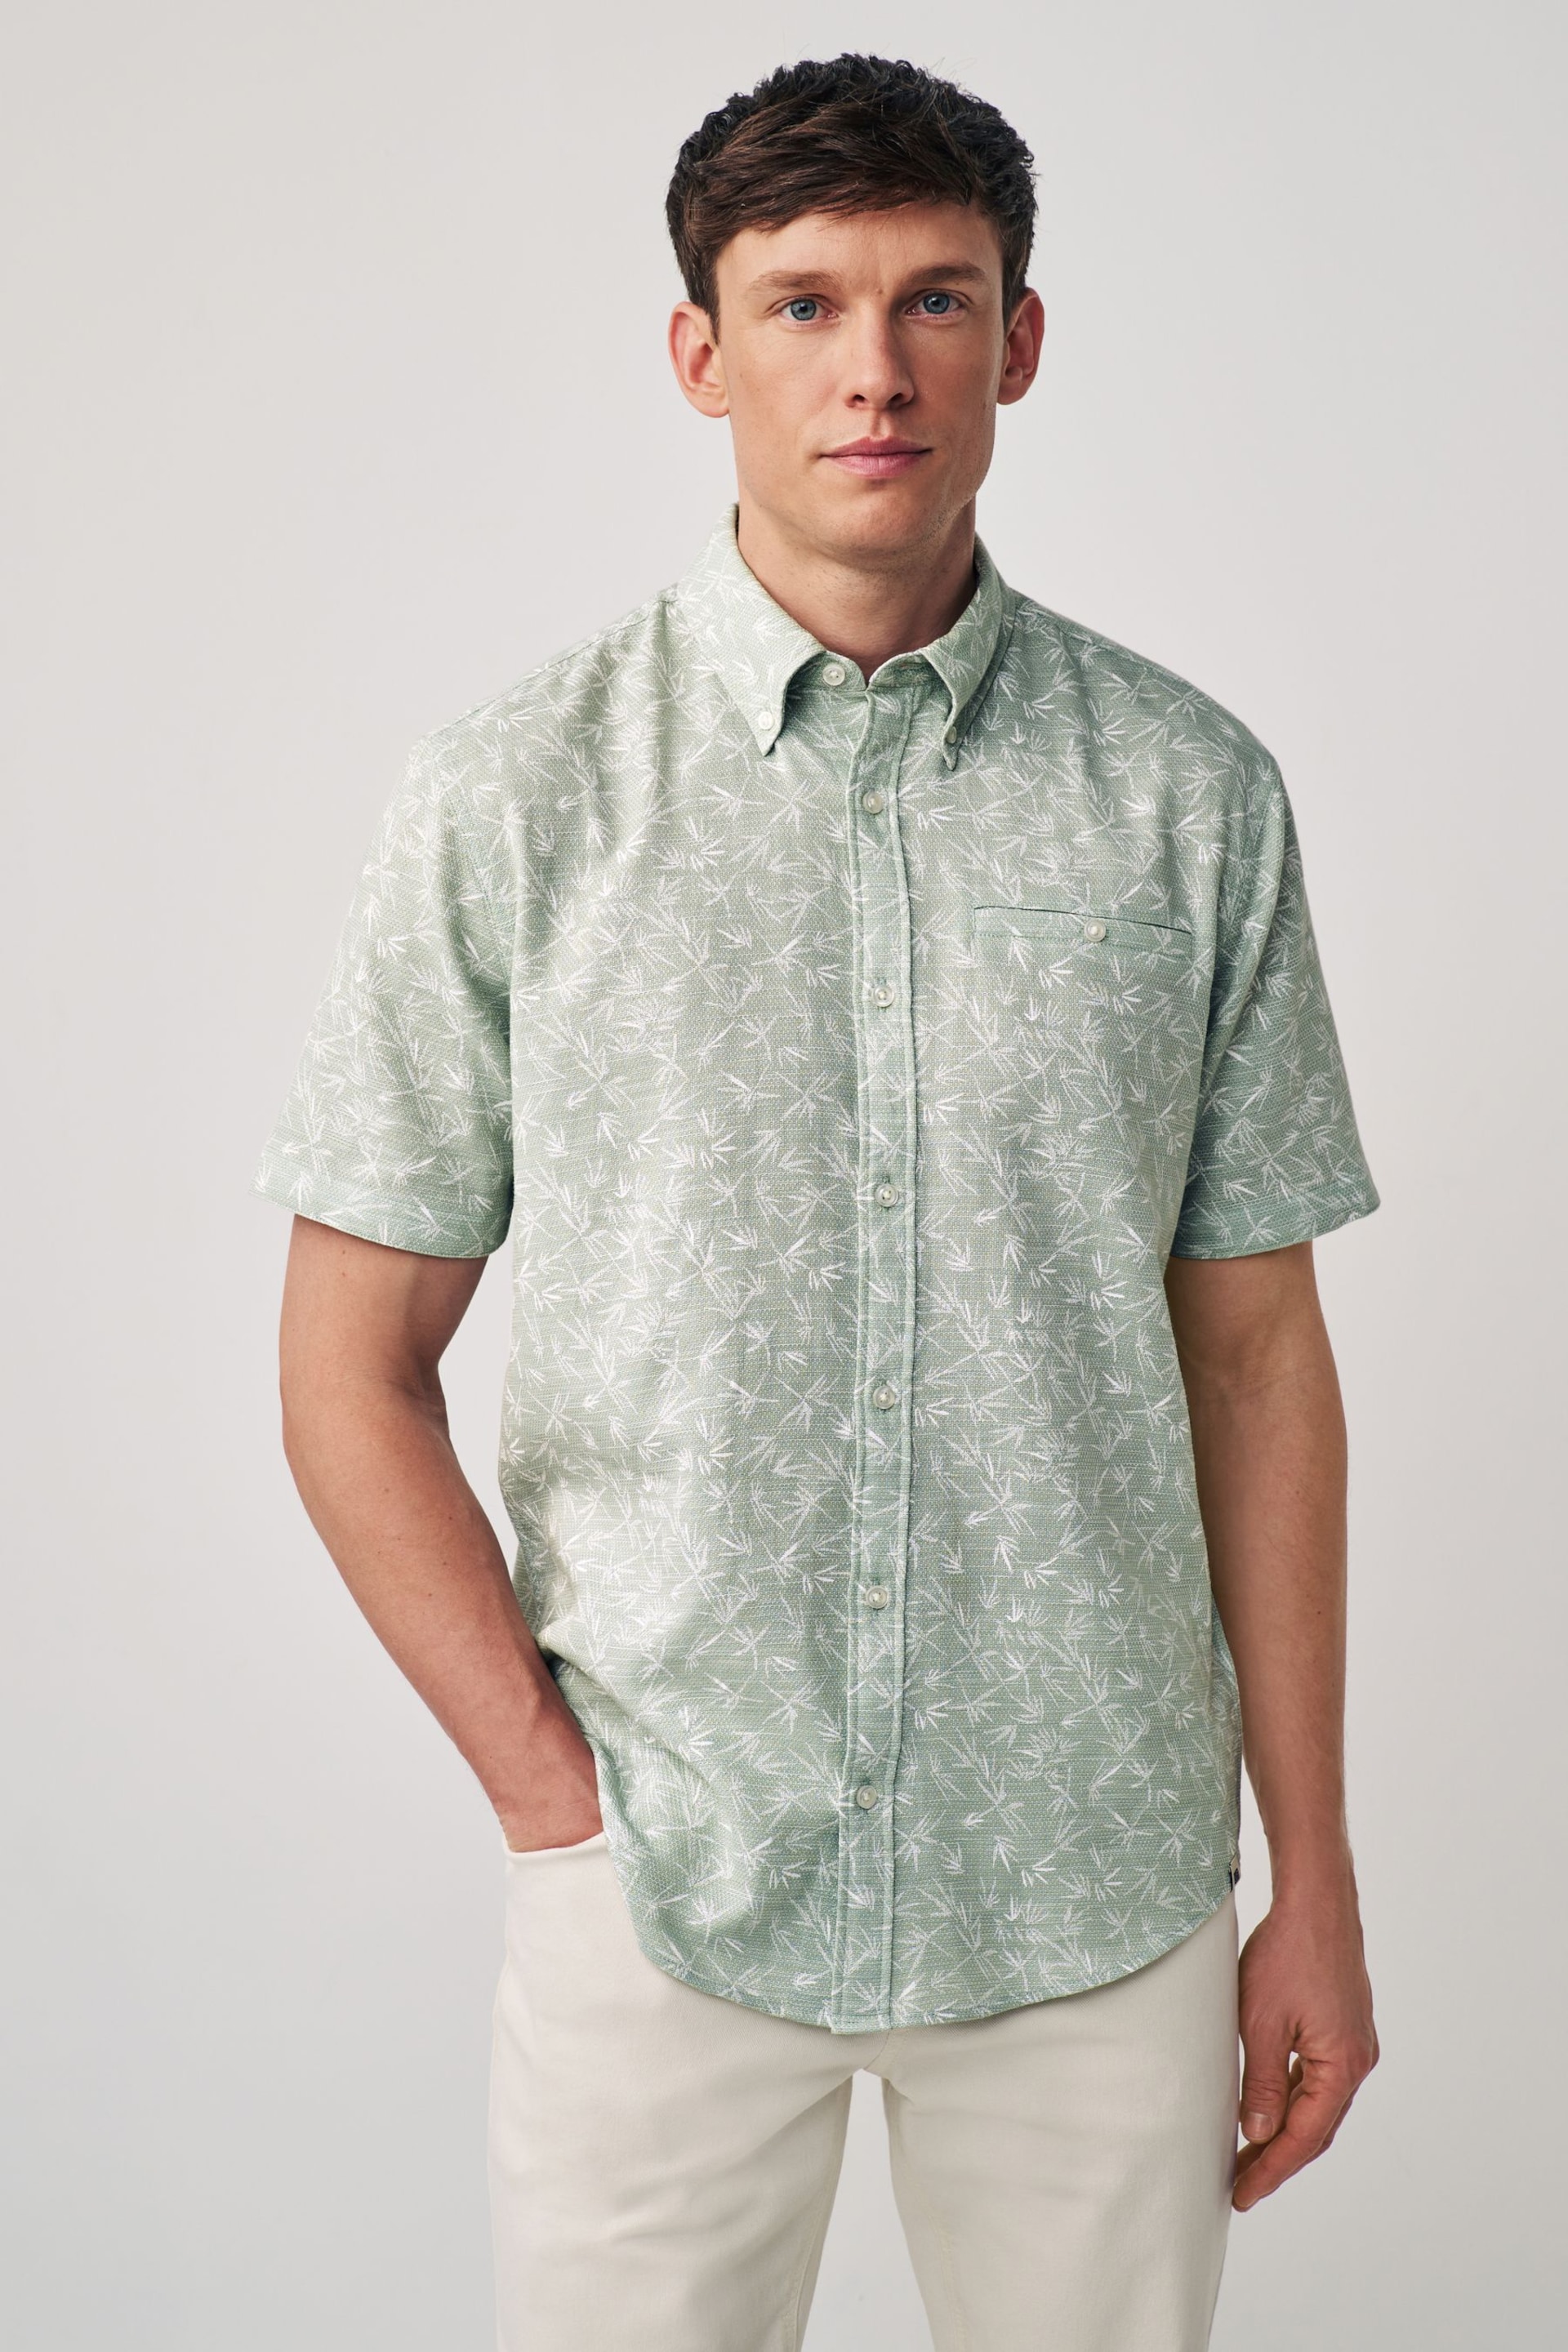 Green Textured Floral Short Sleeve Shirt - Image 3 of 9